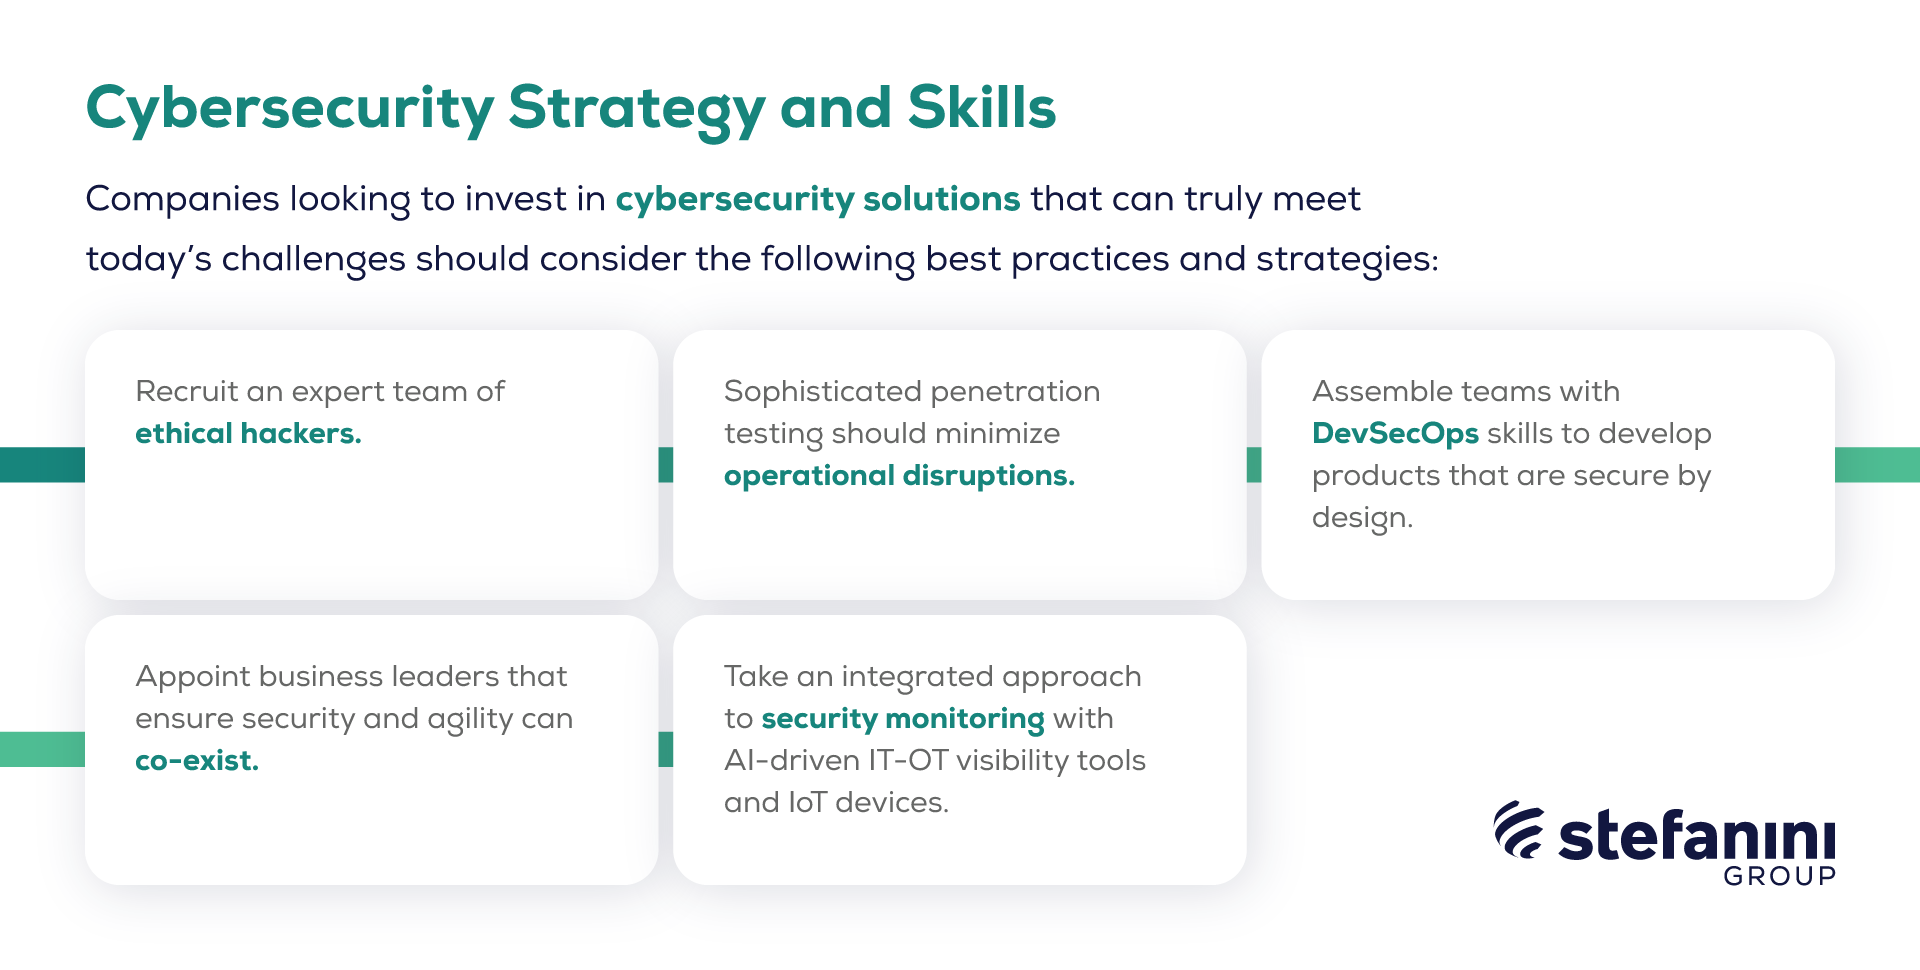 Cybersecurity Strategy and Skills